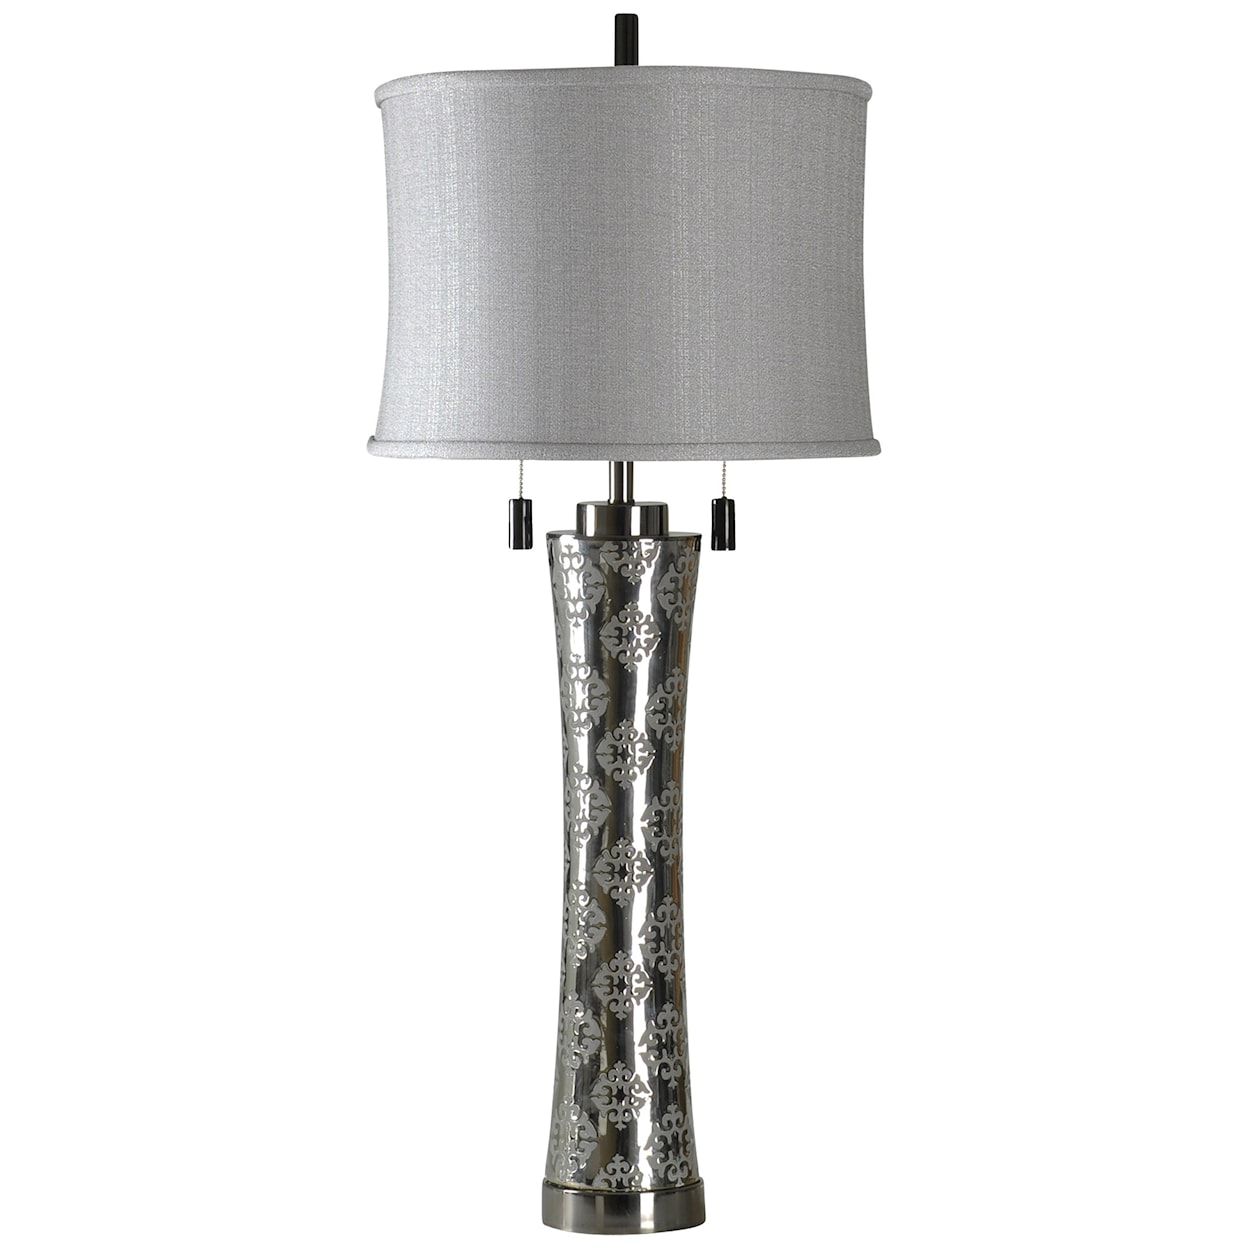 StyleCraft Lamps Transitional Table Lamp